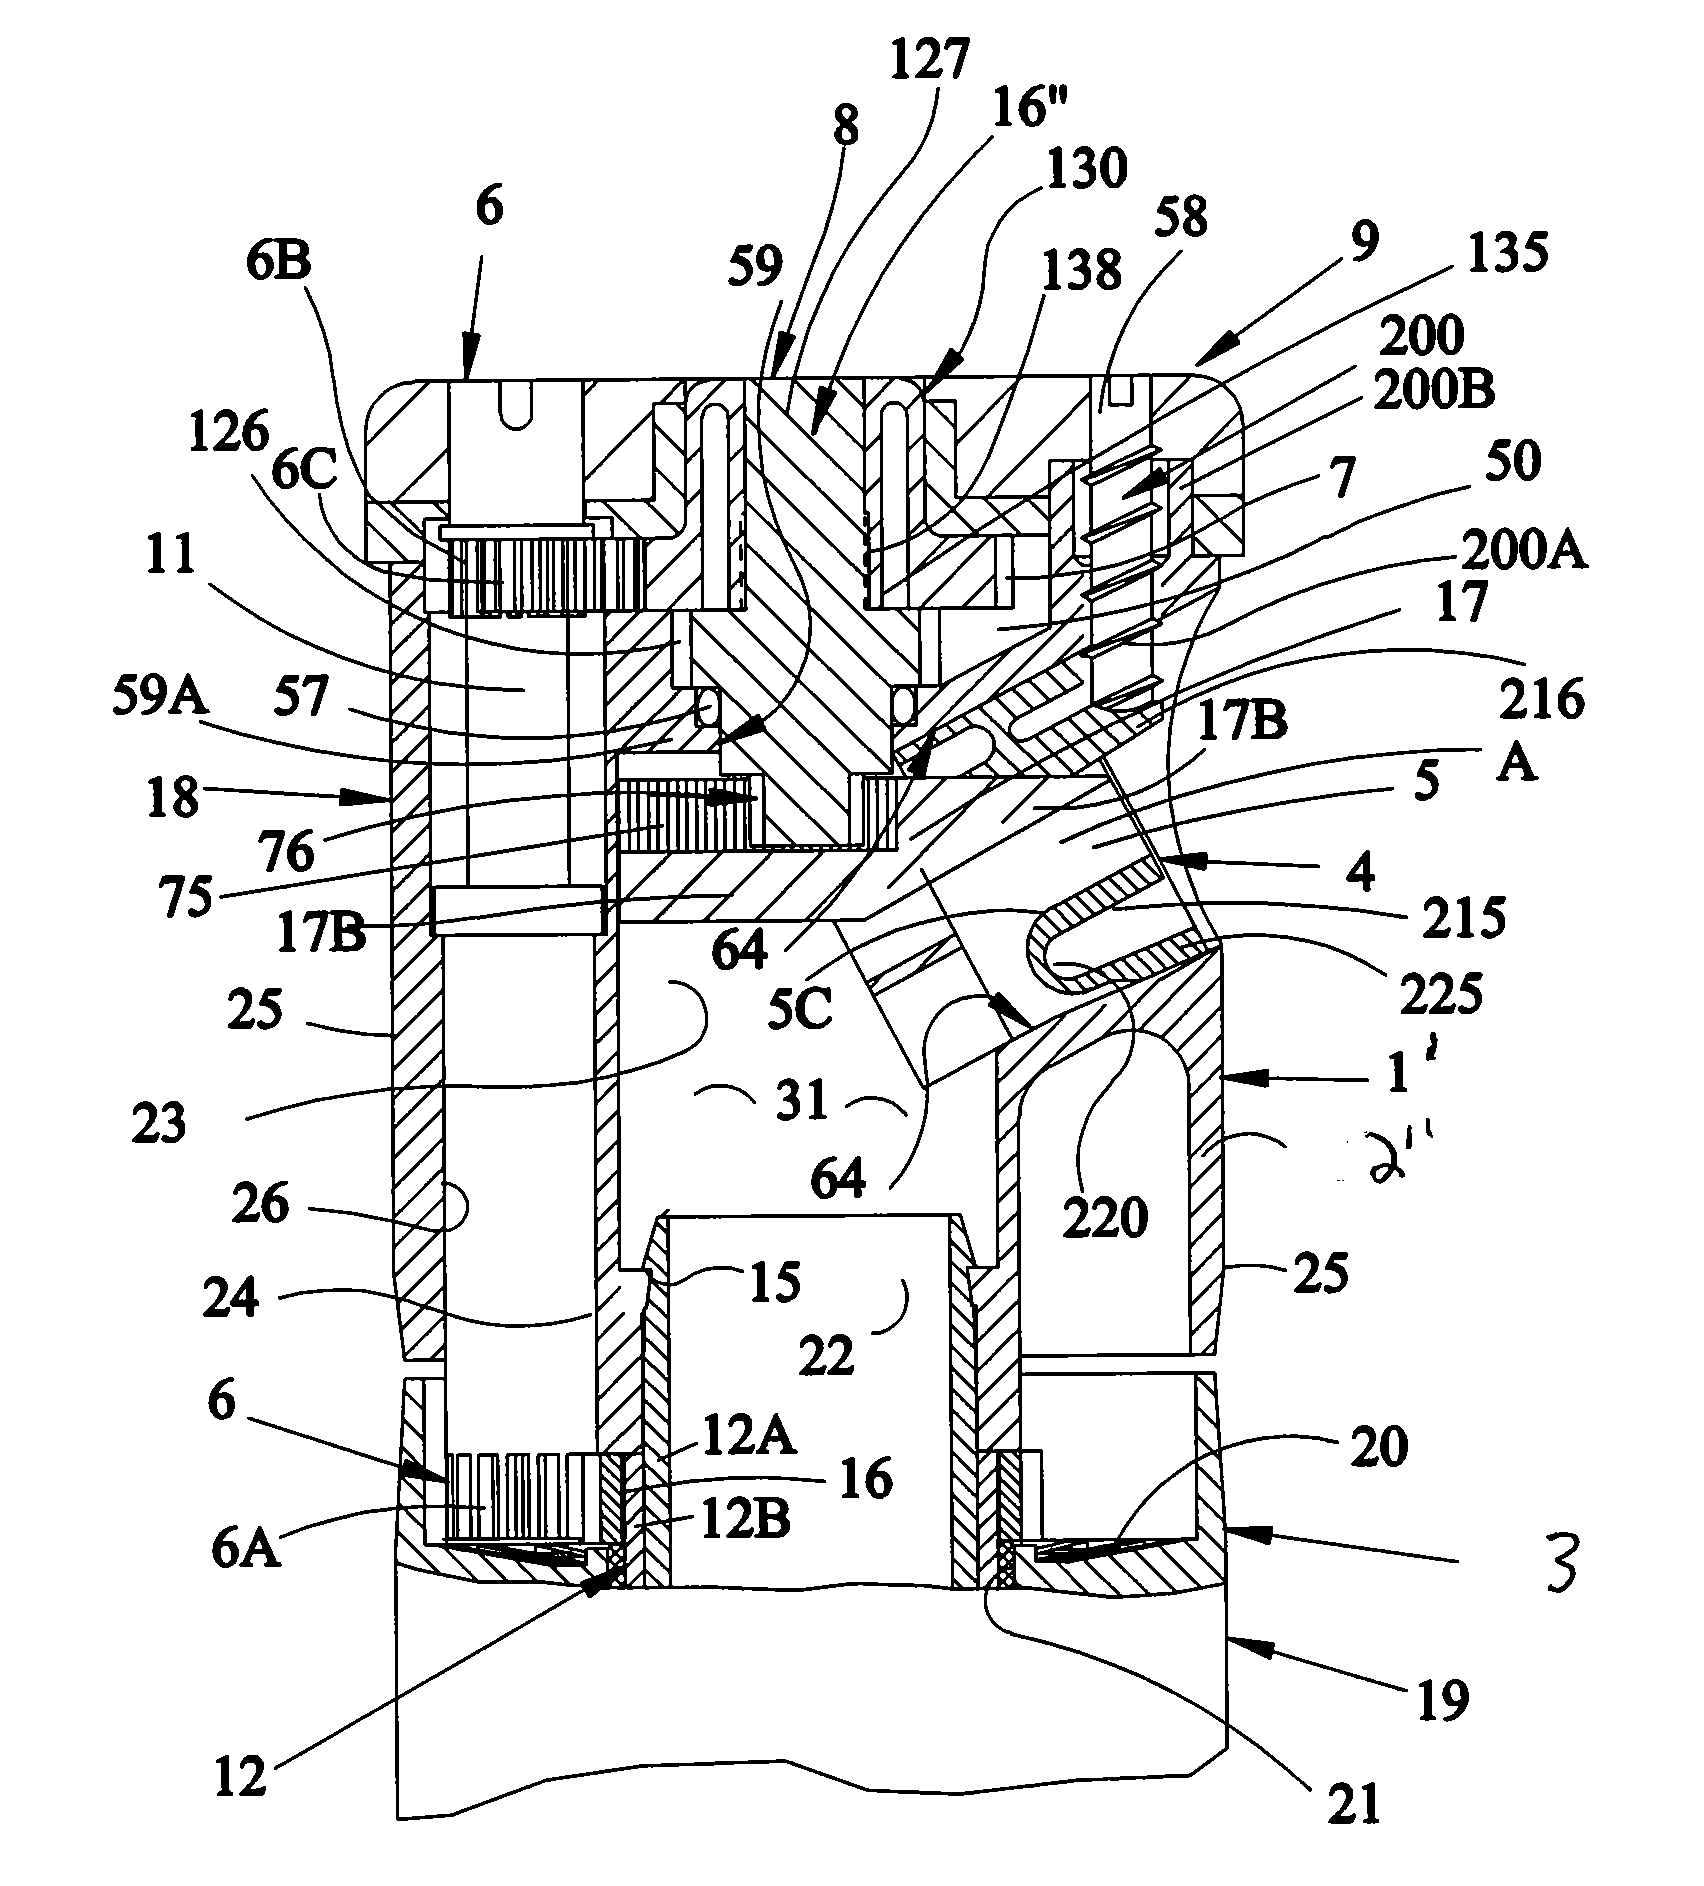 Oscillating nozzle sprinkler assembly with matched precipitation and adjustable arc of coverage